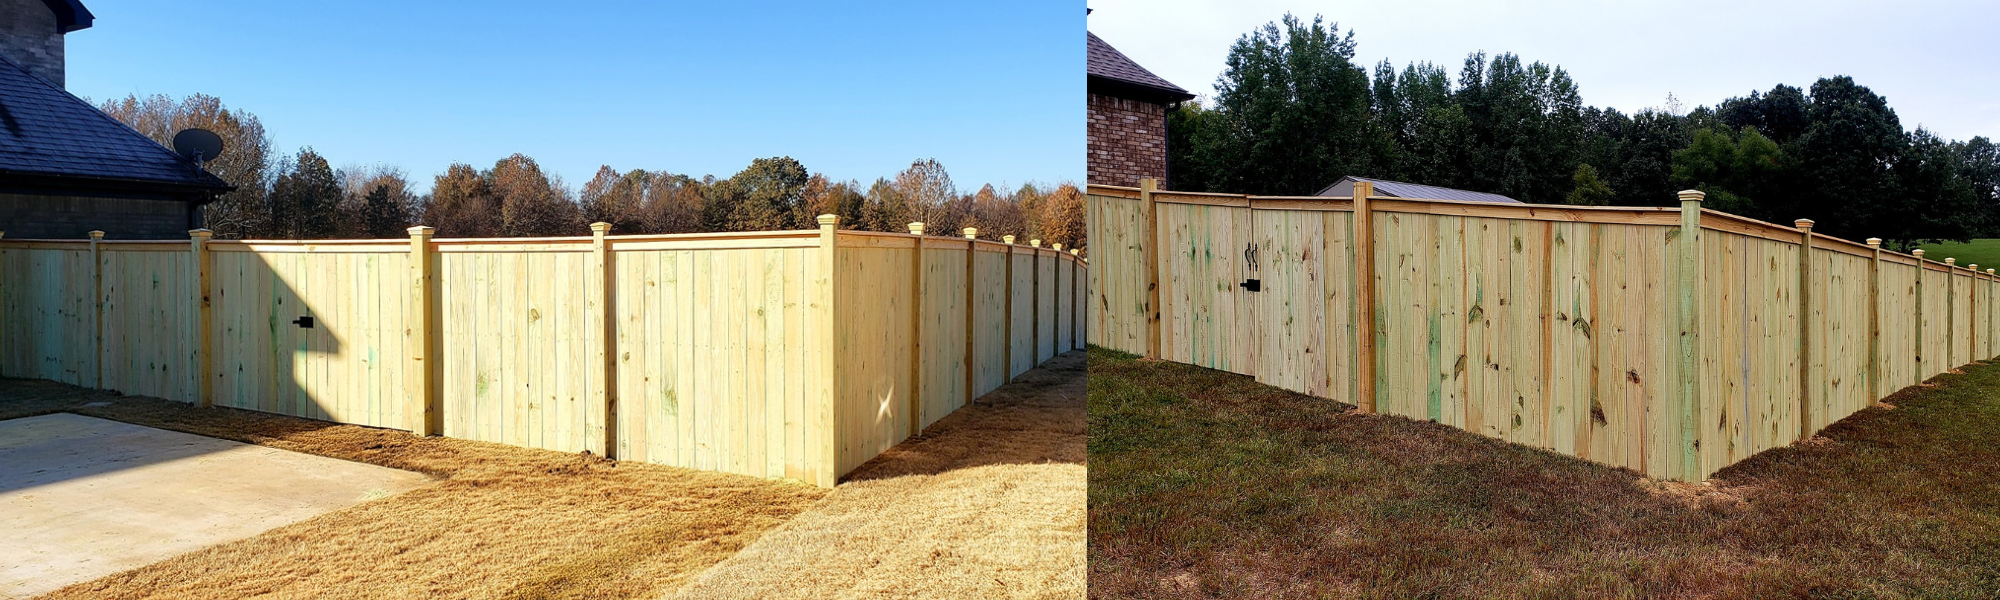 two residential wooden privacy fences 